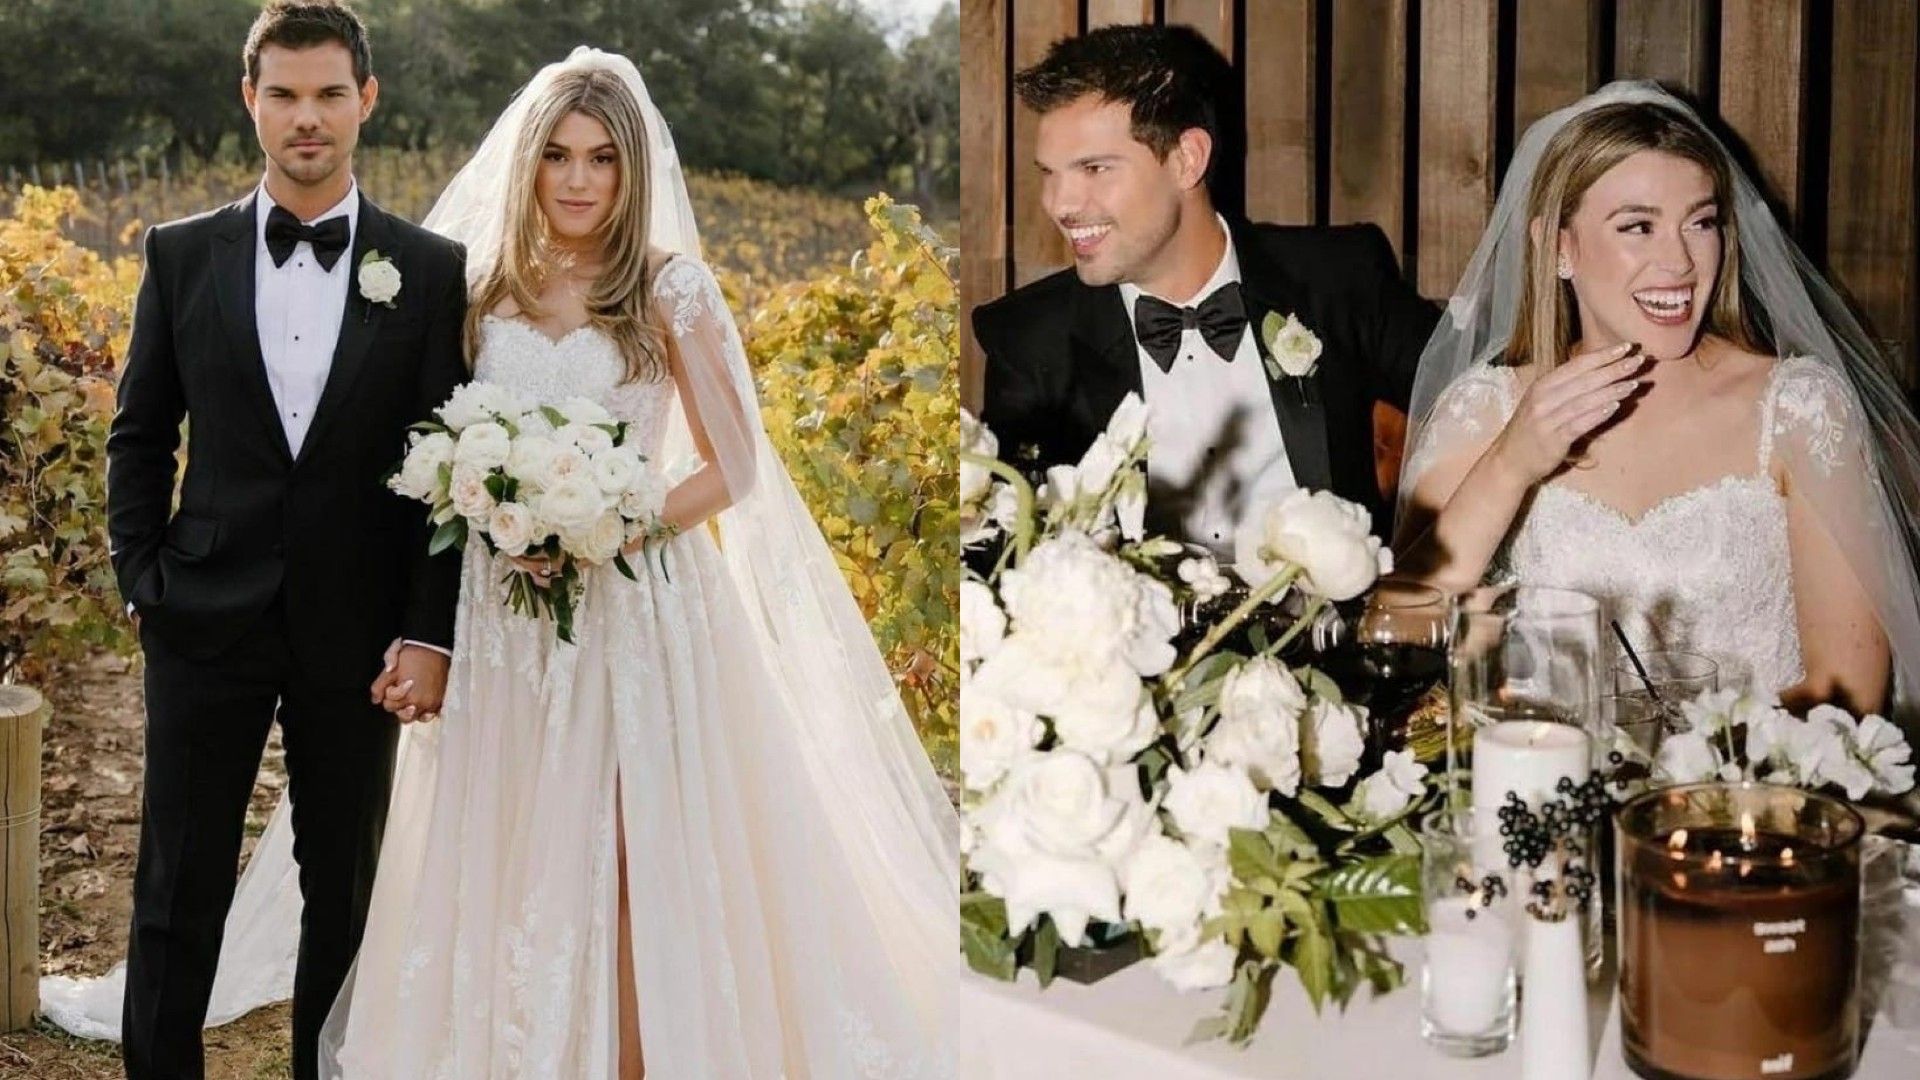 The wedding of Taylor Lautner and Tay Dome